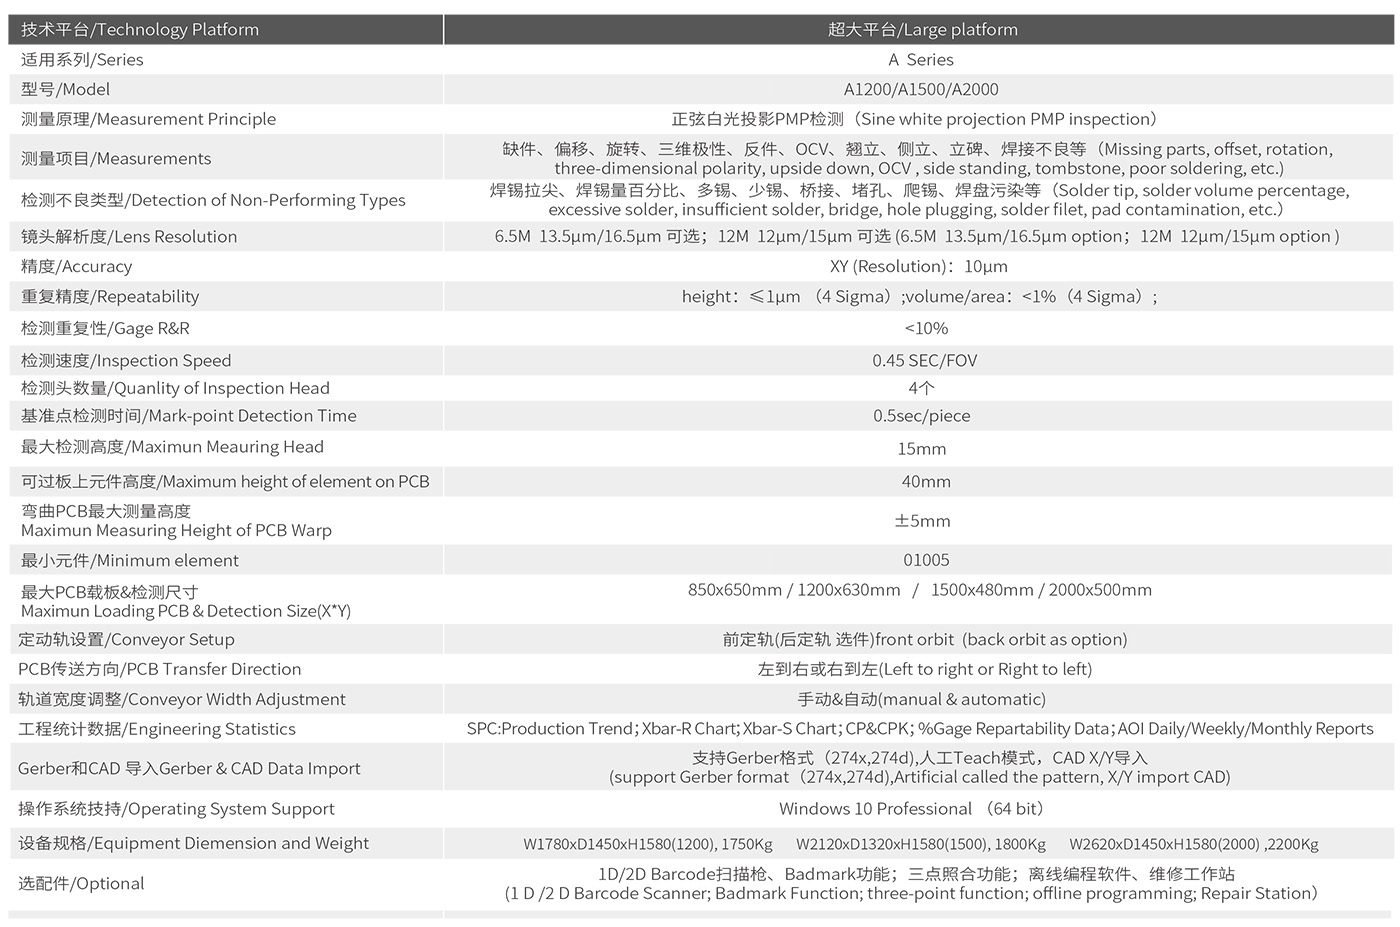 A-1200 Technical Specifications